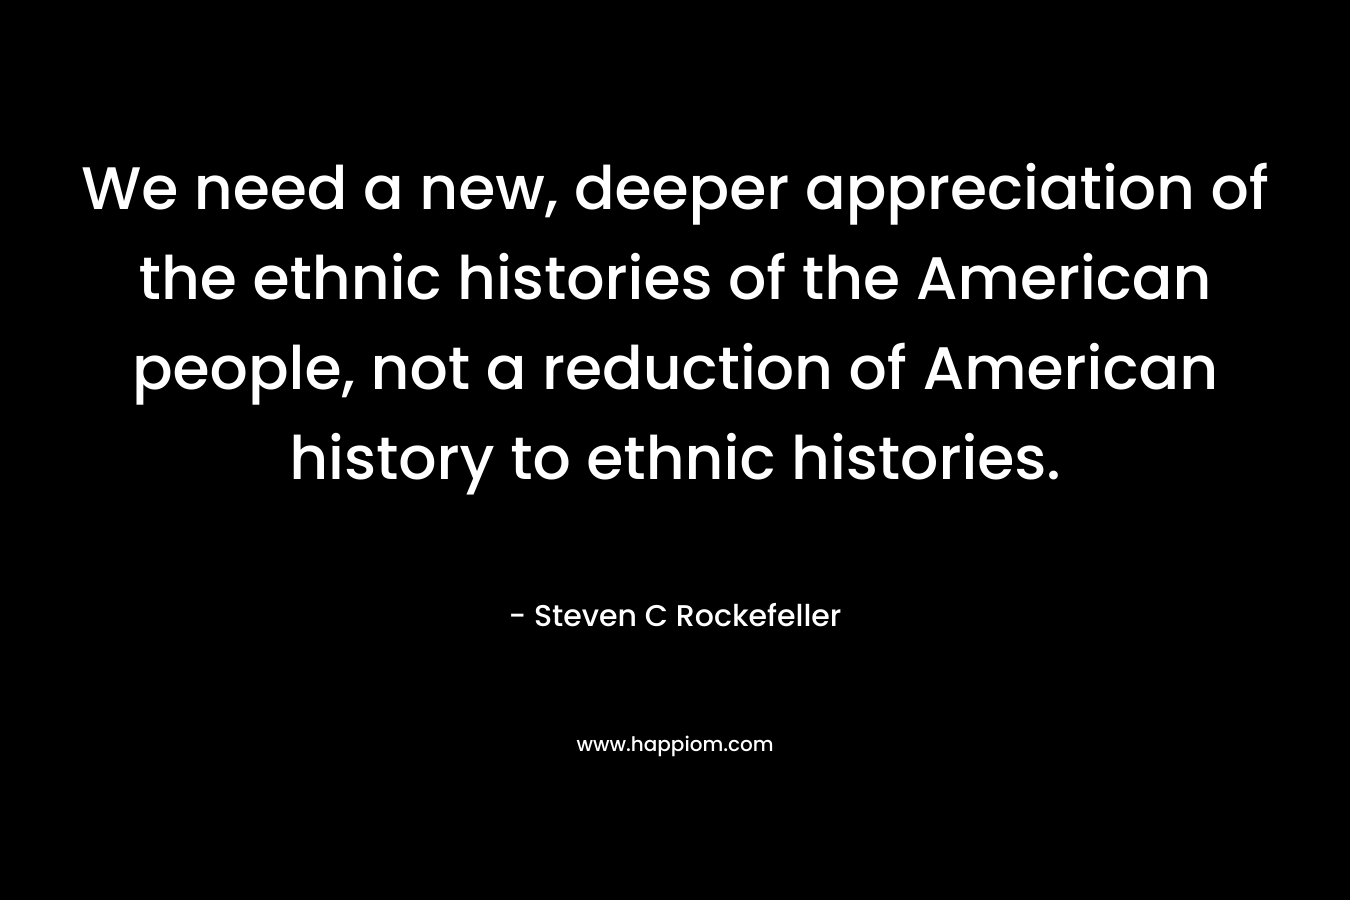 We need a new, deeper appreciation of the ethnic histories of the American people, not a reduction of American history to ethnic histories. – Steven C Rockefeller